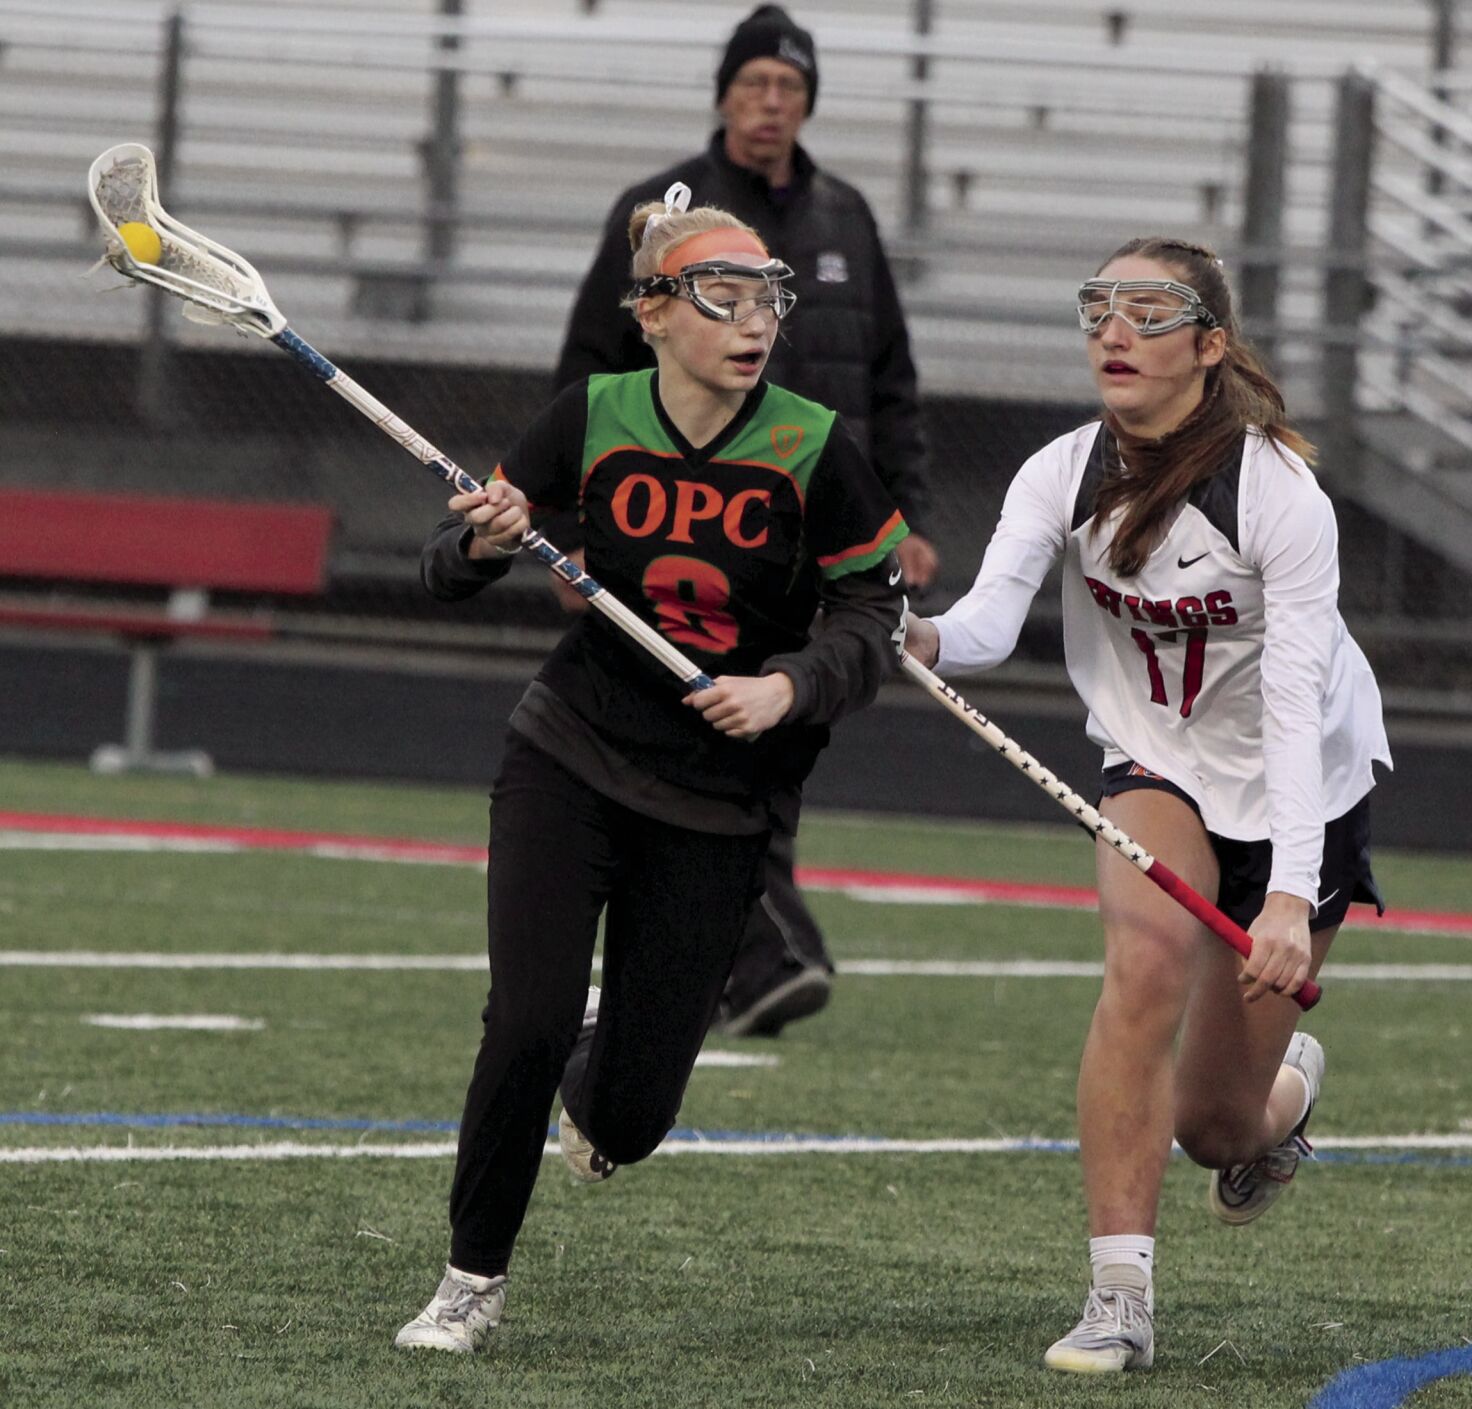 OPC girls lacrosse collects 2 conference wins